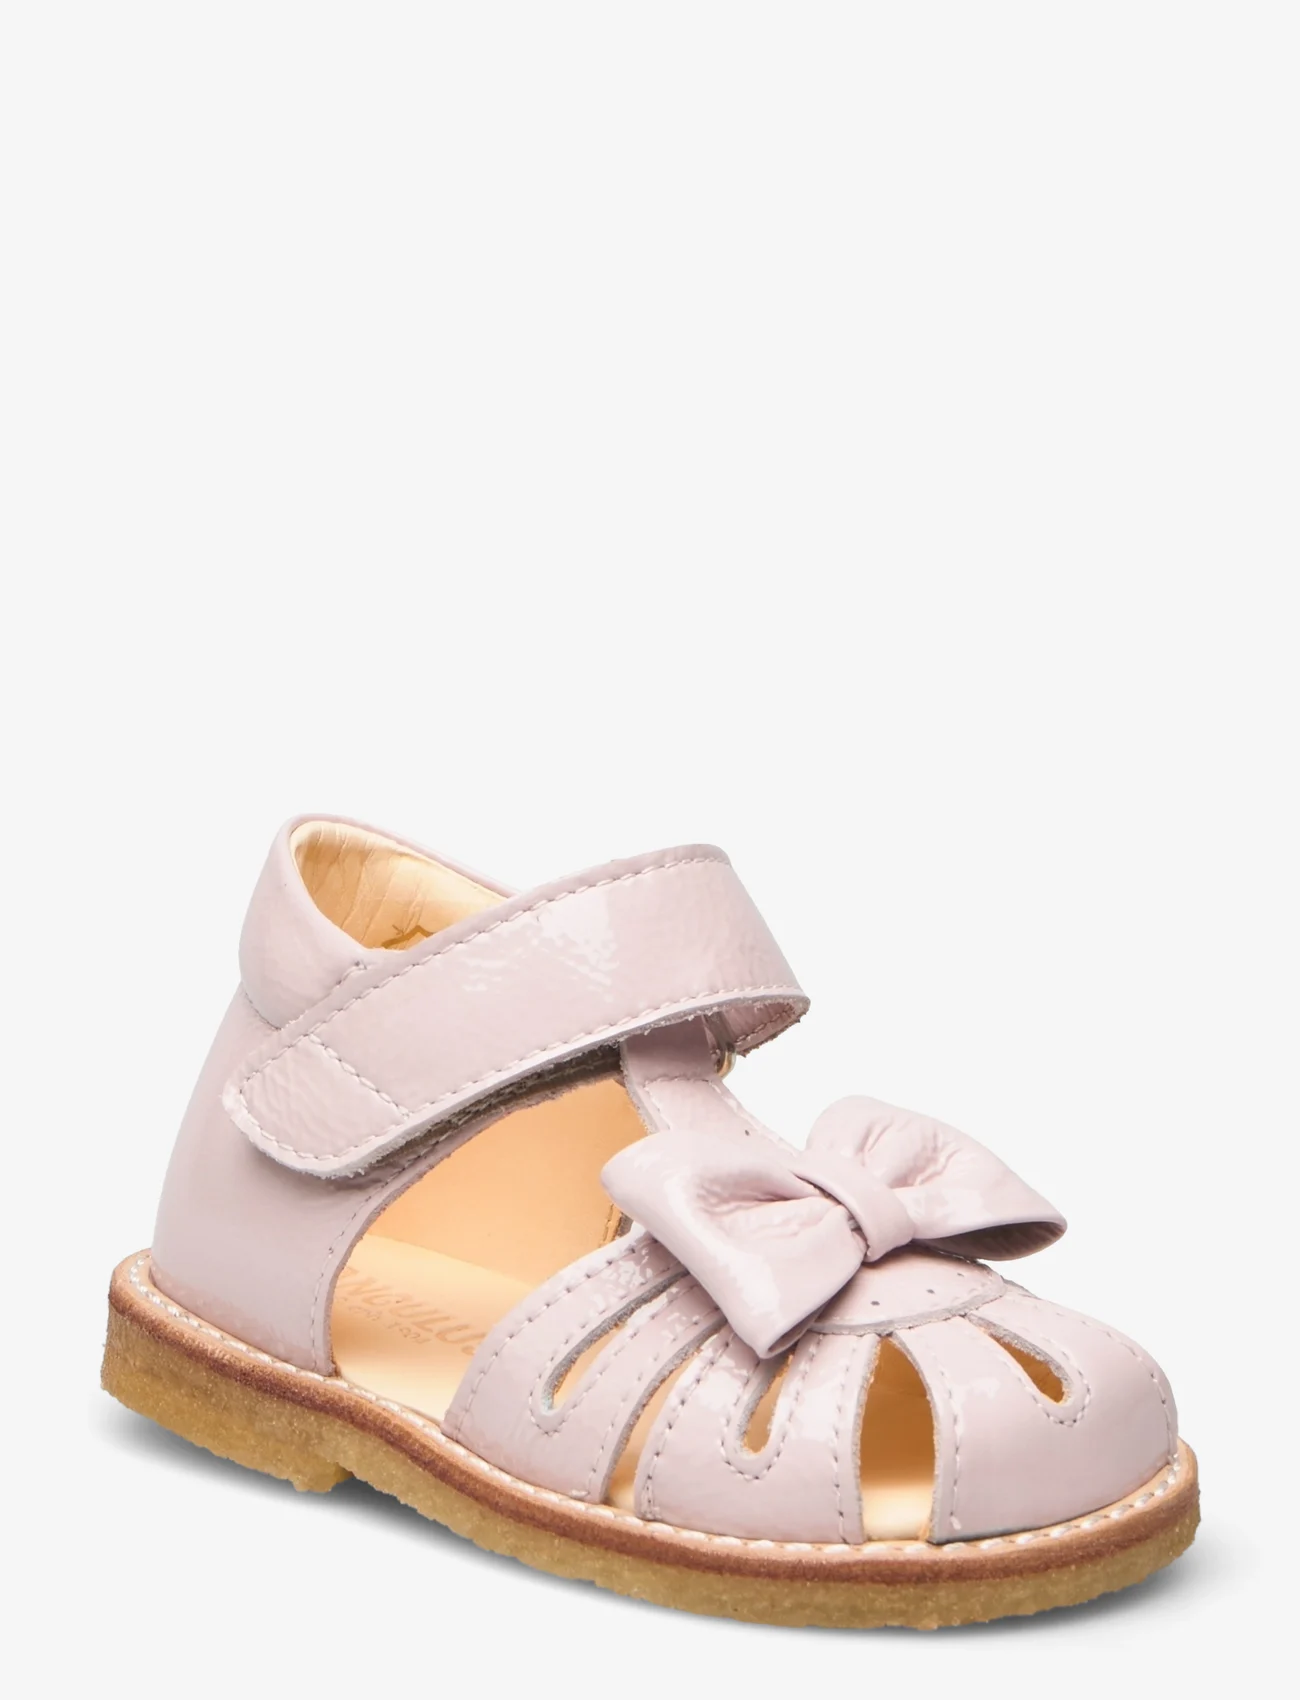 ANGULUS - Sandals - flat - closed toe - - sommerschnäppchen - 2704 pale rose - 0